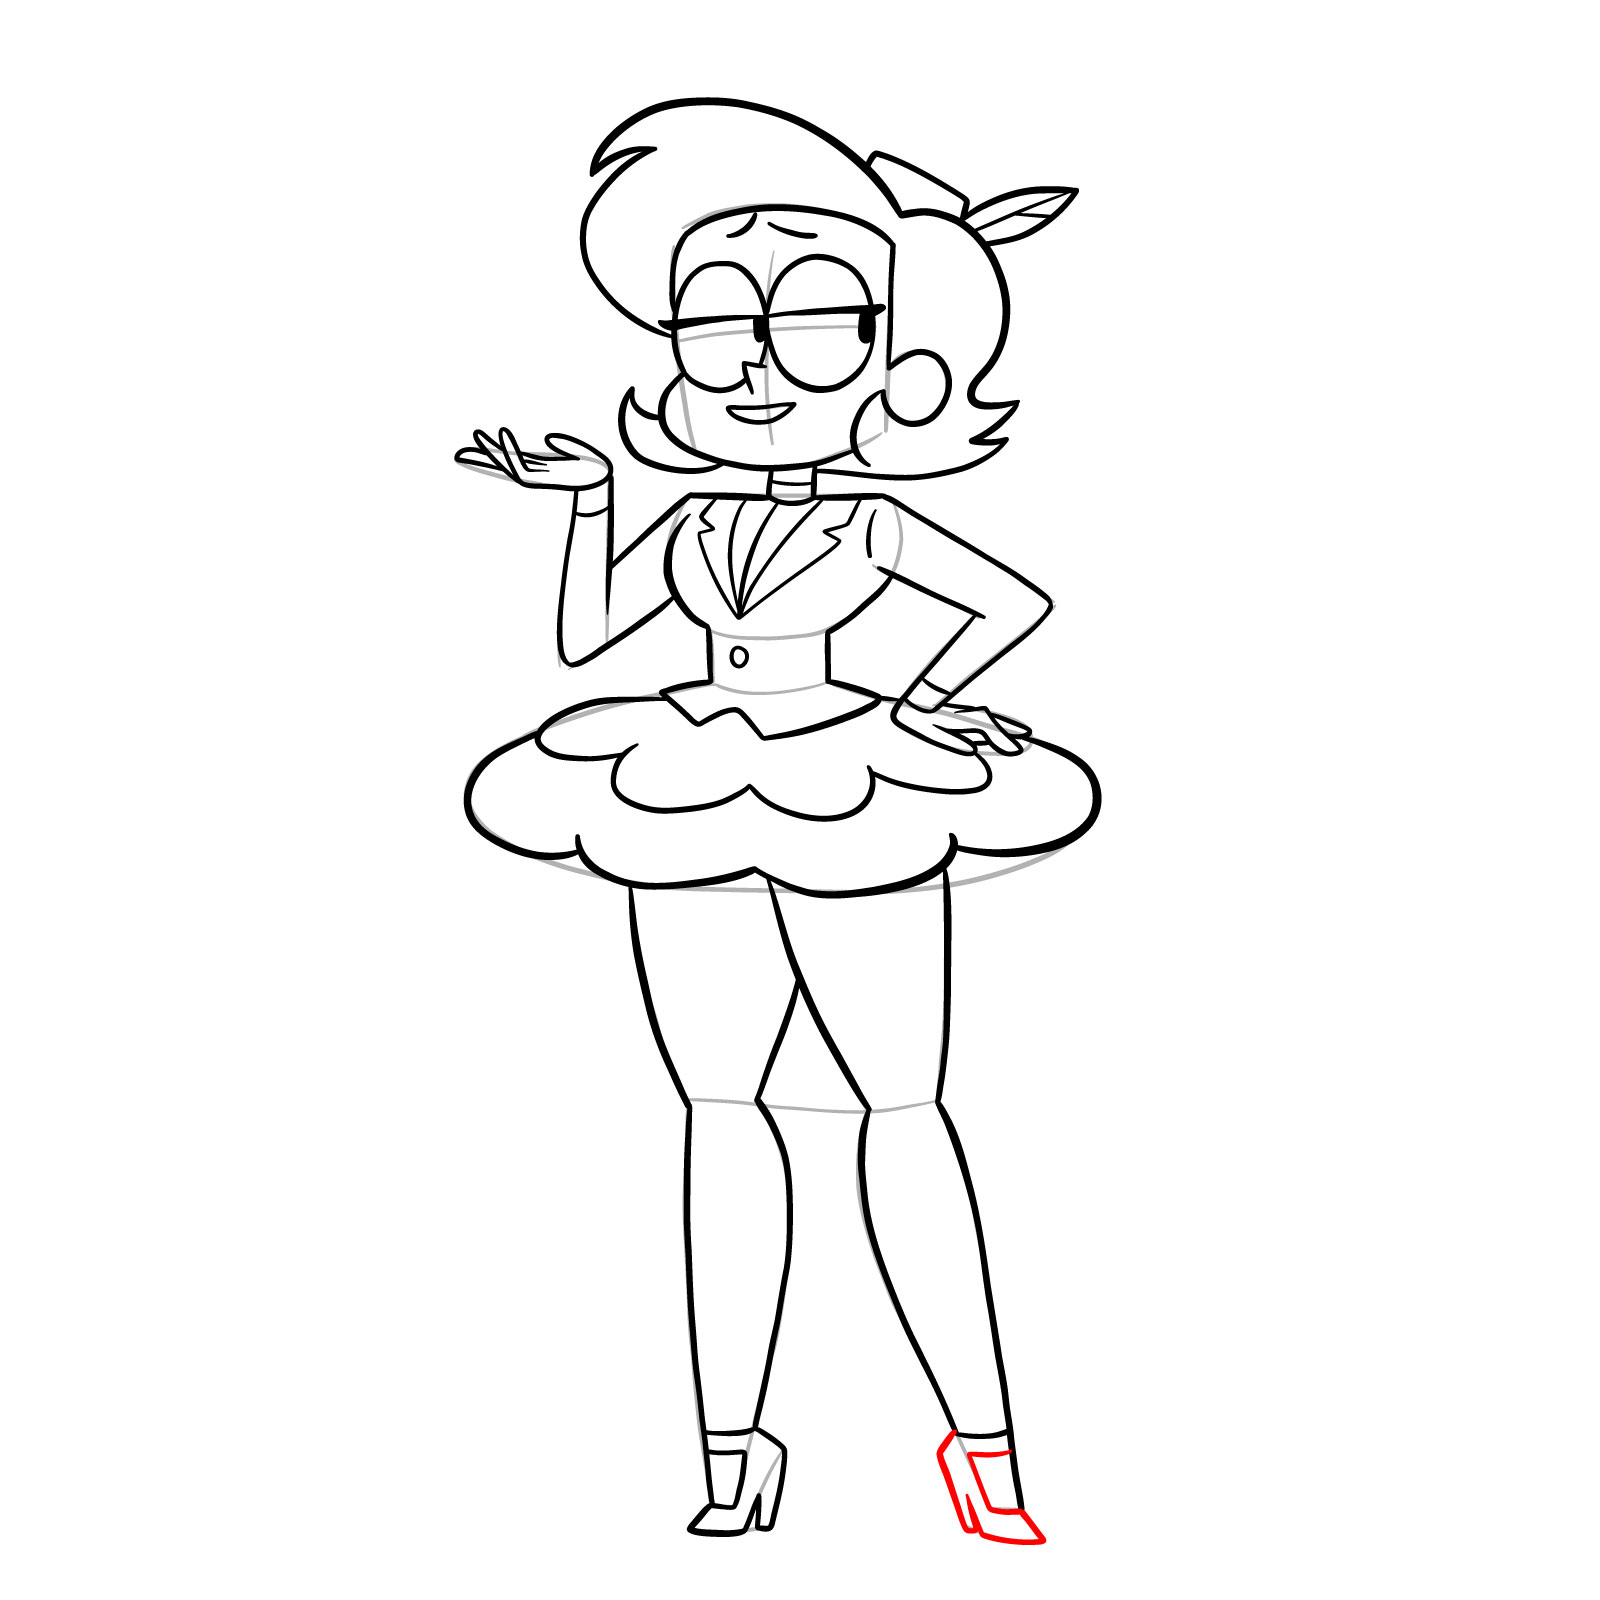 How to draw Elodie from OK K.O.! - step 35